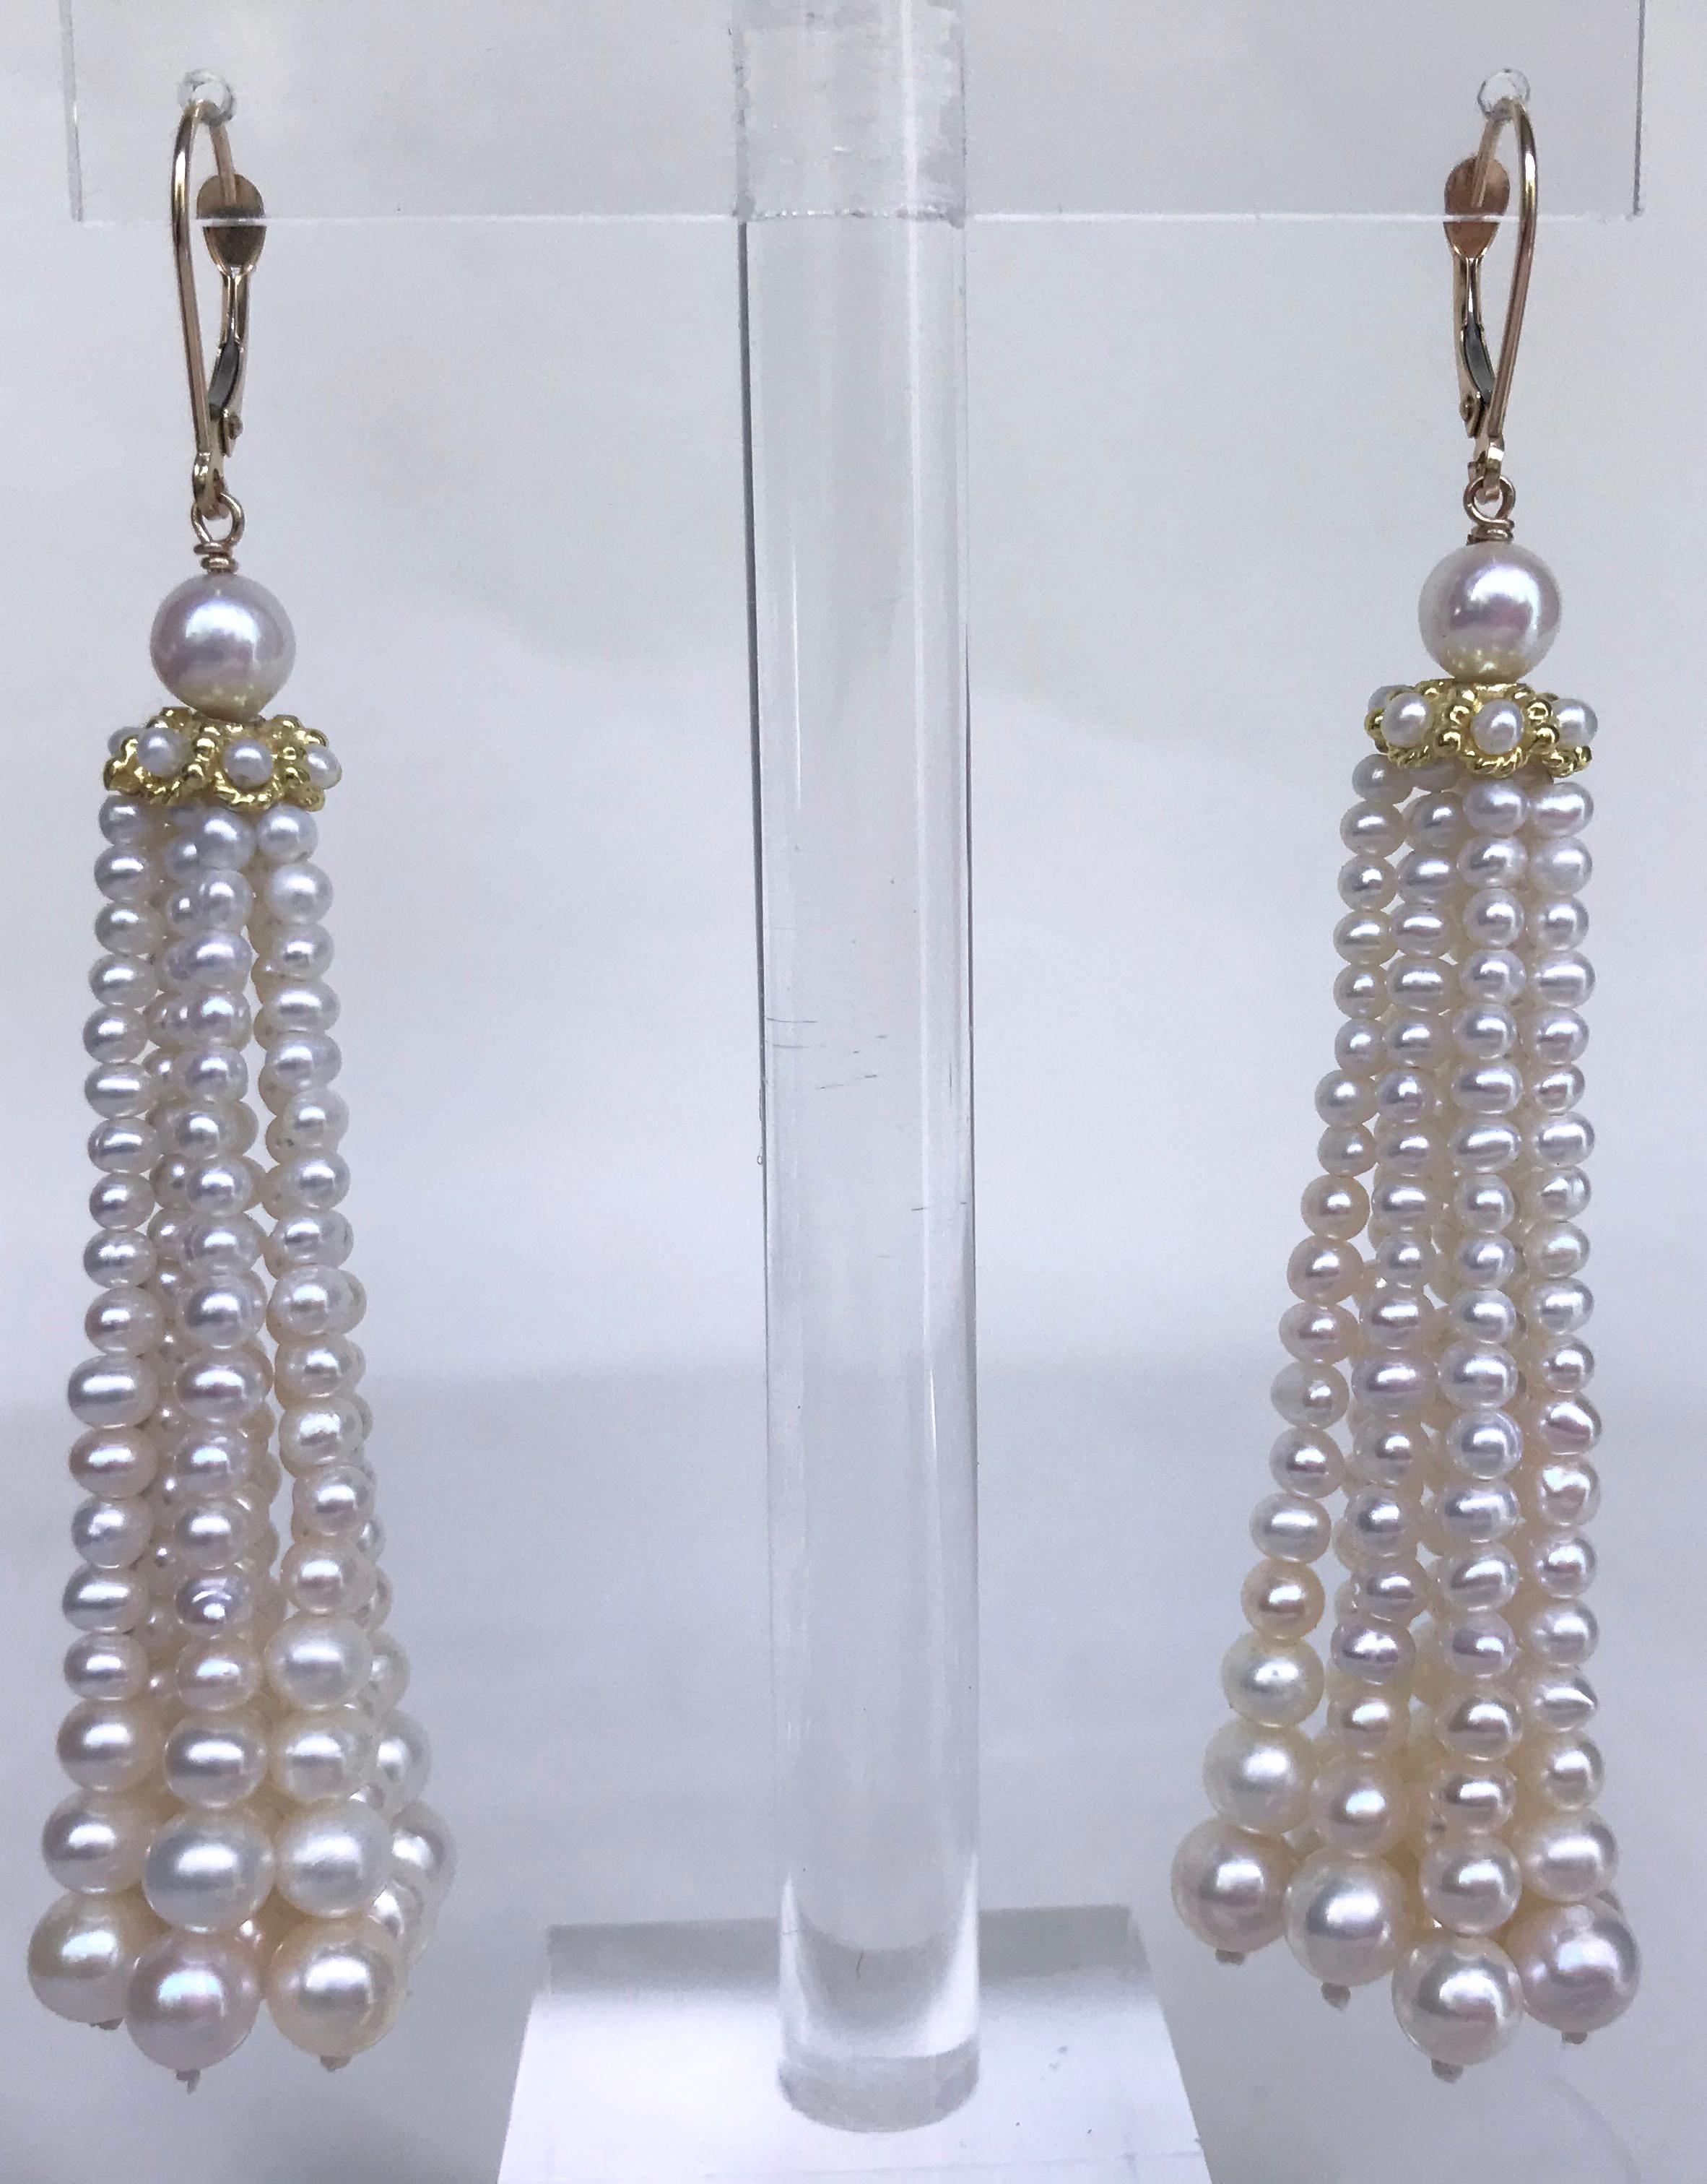 Elegant tassel earrings by Marina J, in strands of cultured pearls, graduated in size from 4 1/2 to 3 mm, and topped by a cultured pearl measuring 6 mm, below which is a gold rondell through which the tassels emanate. The wire is yellow gold. The